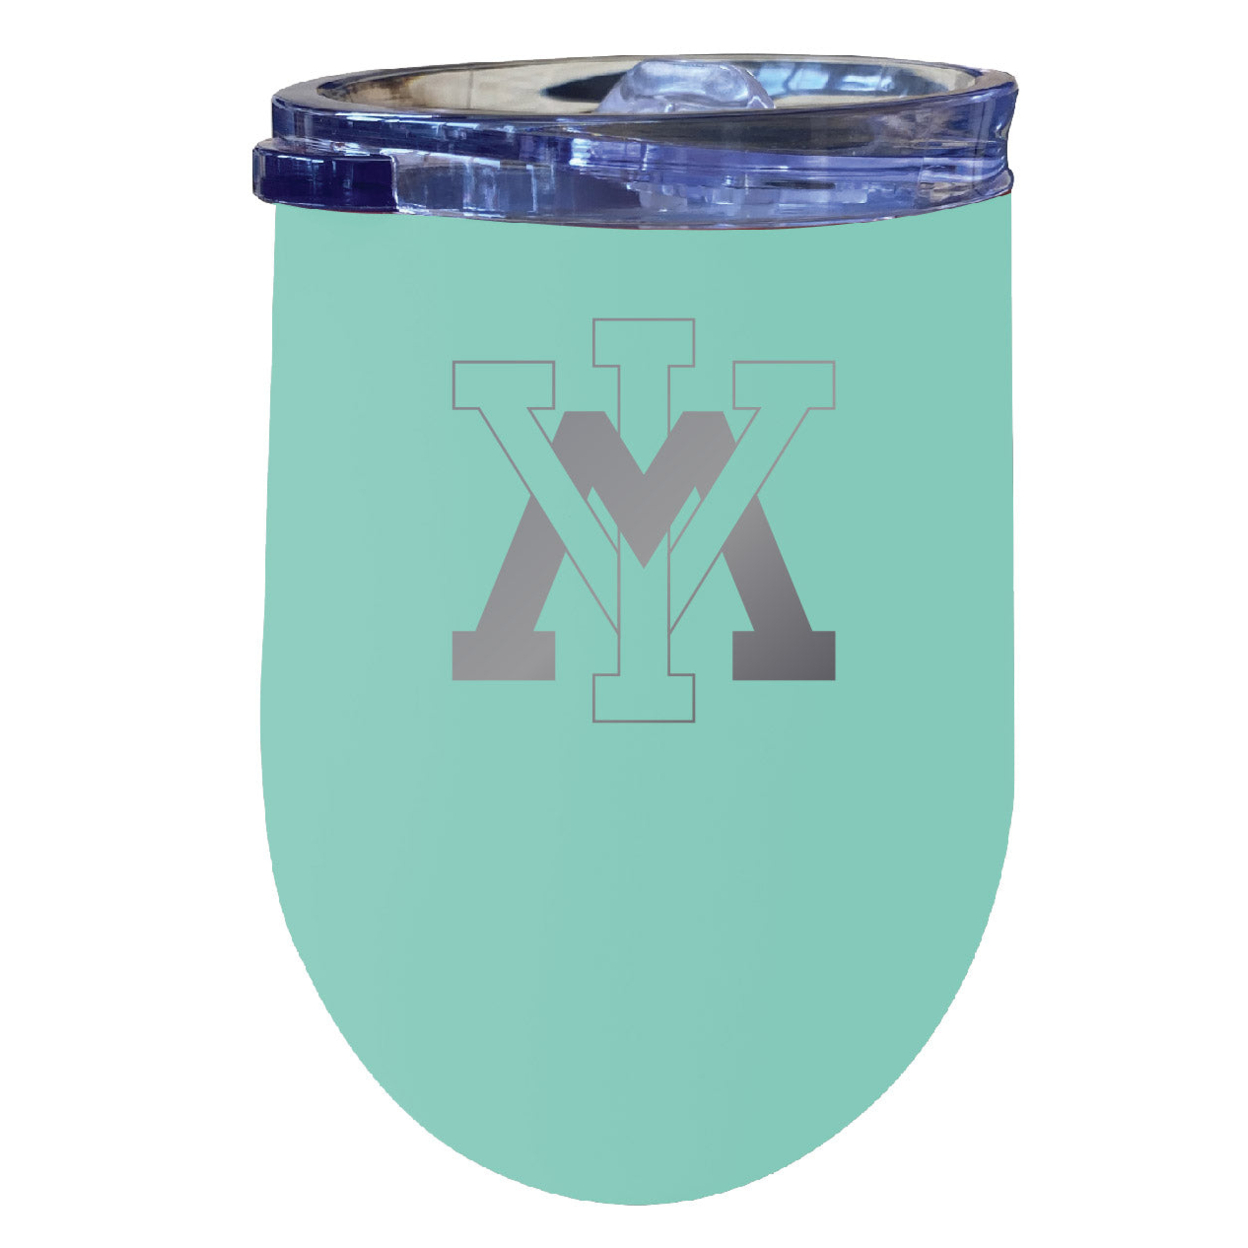 VMI Keydets 12 Oz Etched Insulated Wine Stainless Steel Tumbler - Choose Your Color - Navy